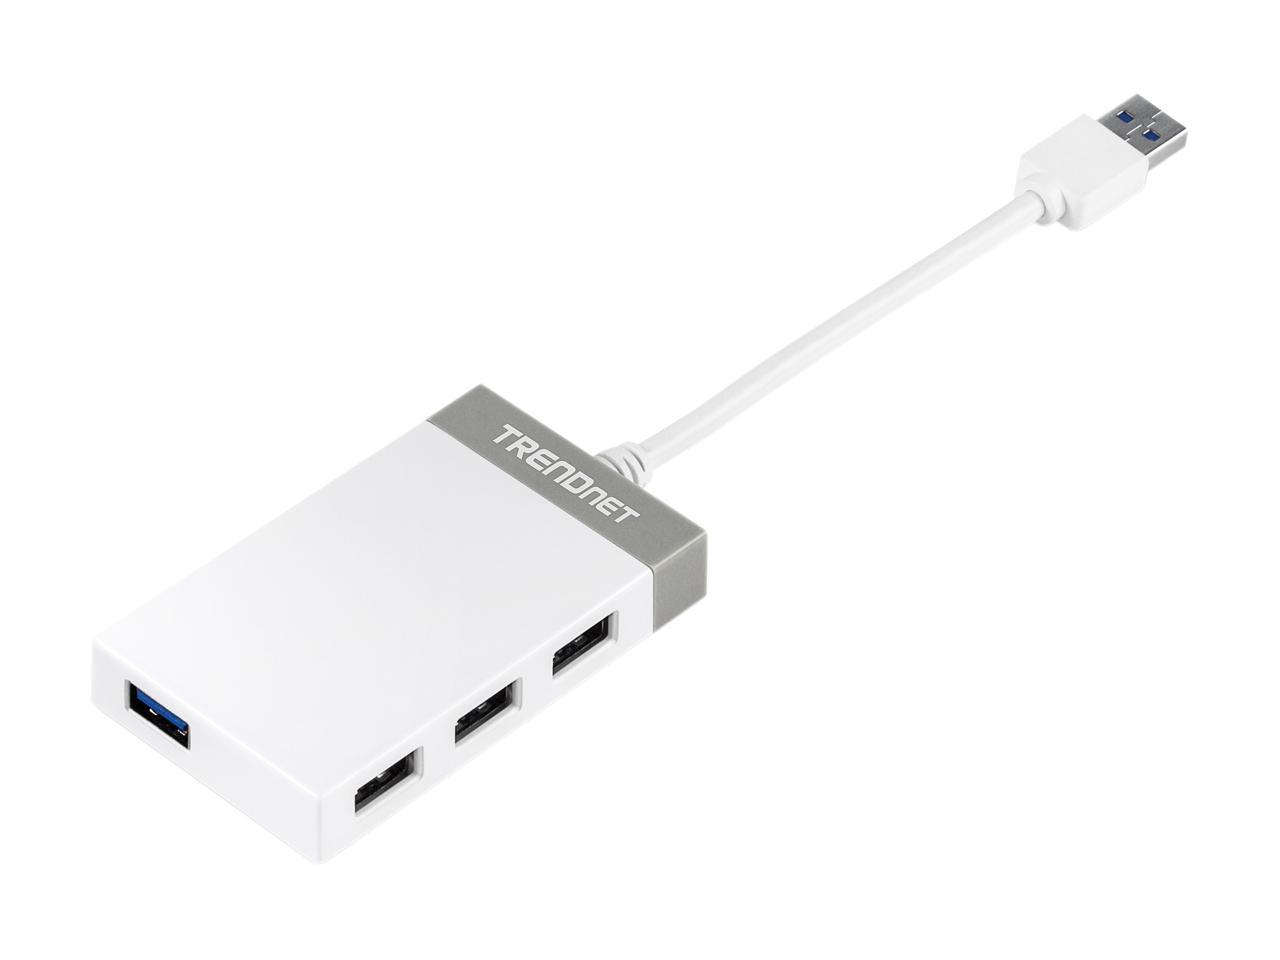 TRENDnet TU3-H4E 4-Port USB 3.0 Mini Hub with integrated 14cm (5.5 in) USB 3.0 Cable for Windows, Mac OS, MacBook, and Surface Pro